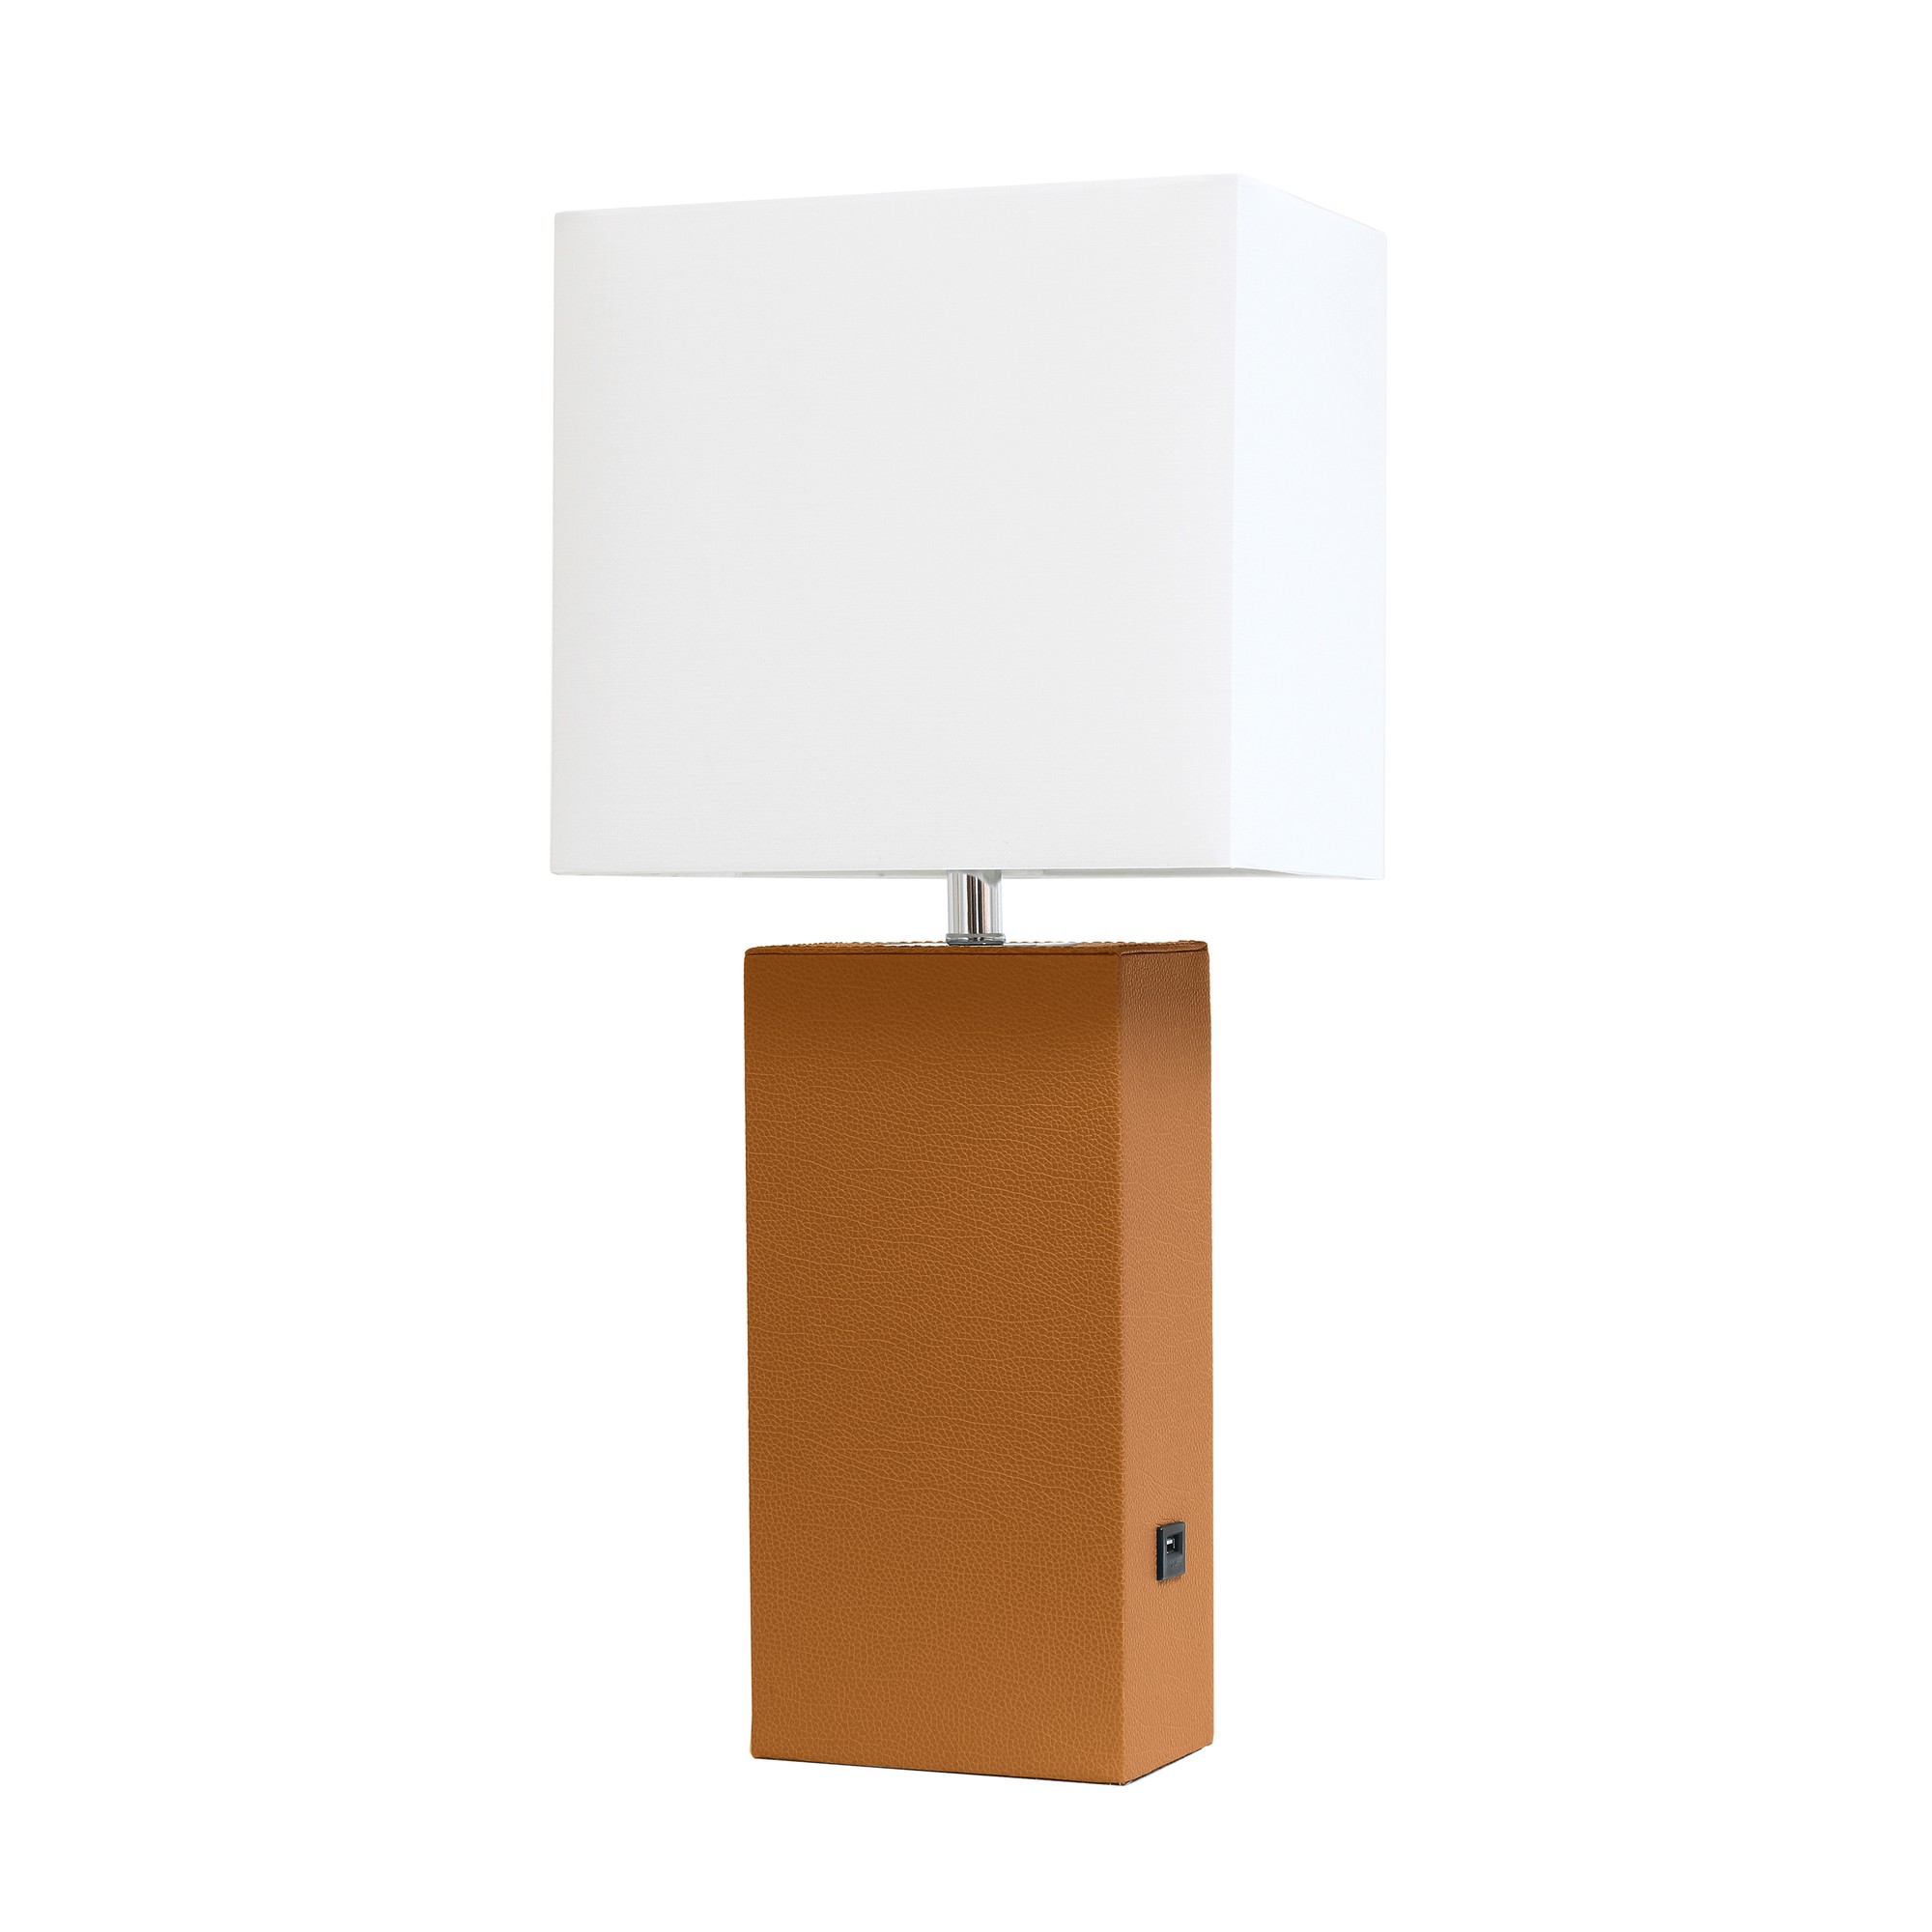 21in Table Lamp USB Charg Port White Shade Tan